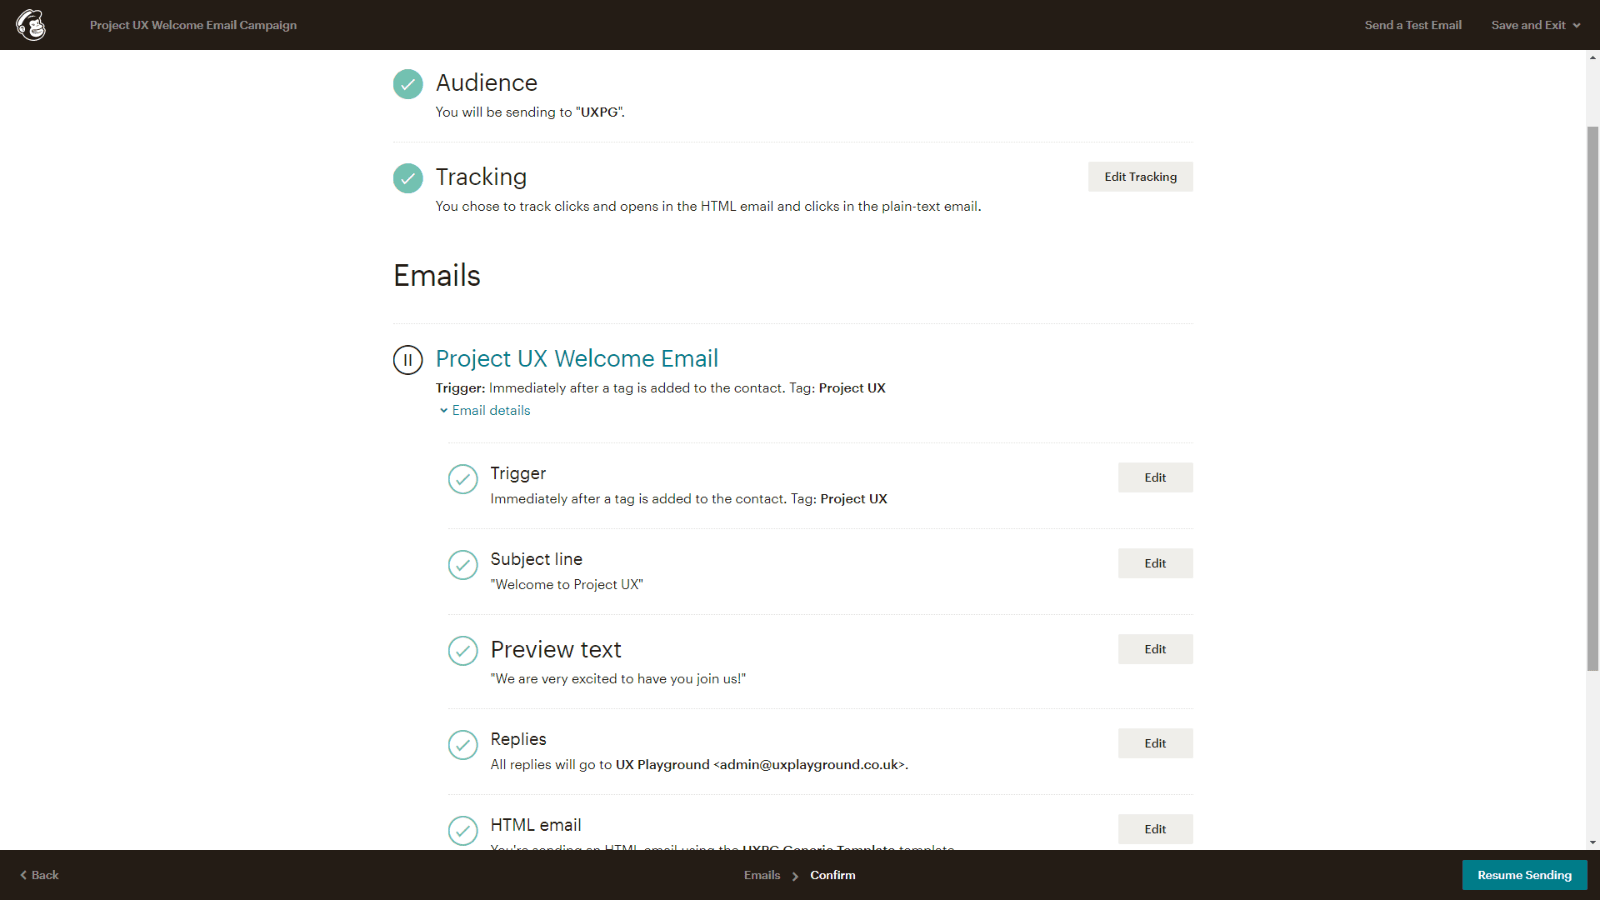 This flow shows the process of adding a new contact into Mailchimp when someone fills in a form